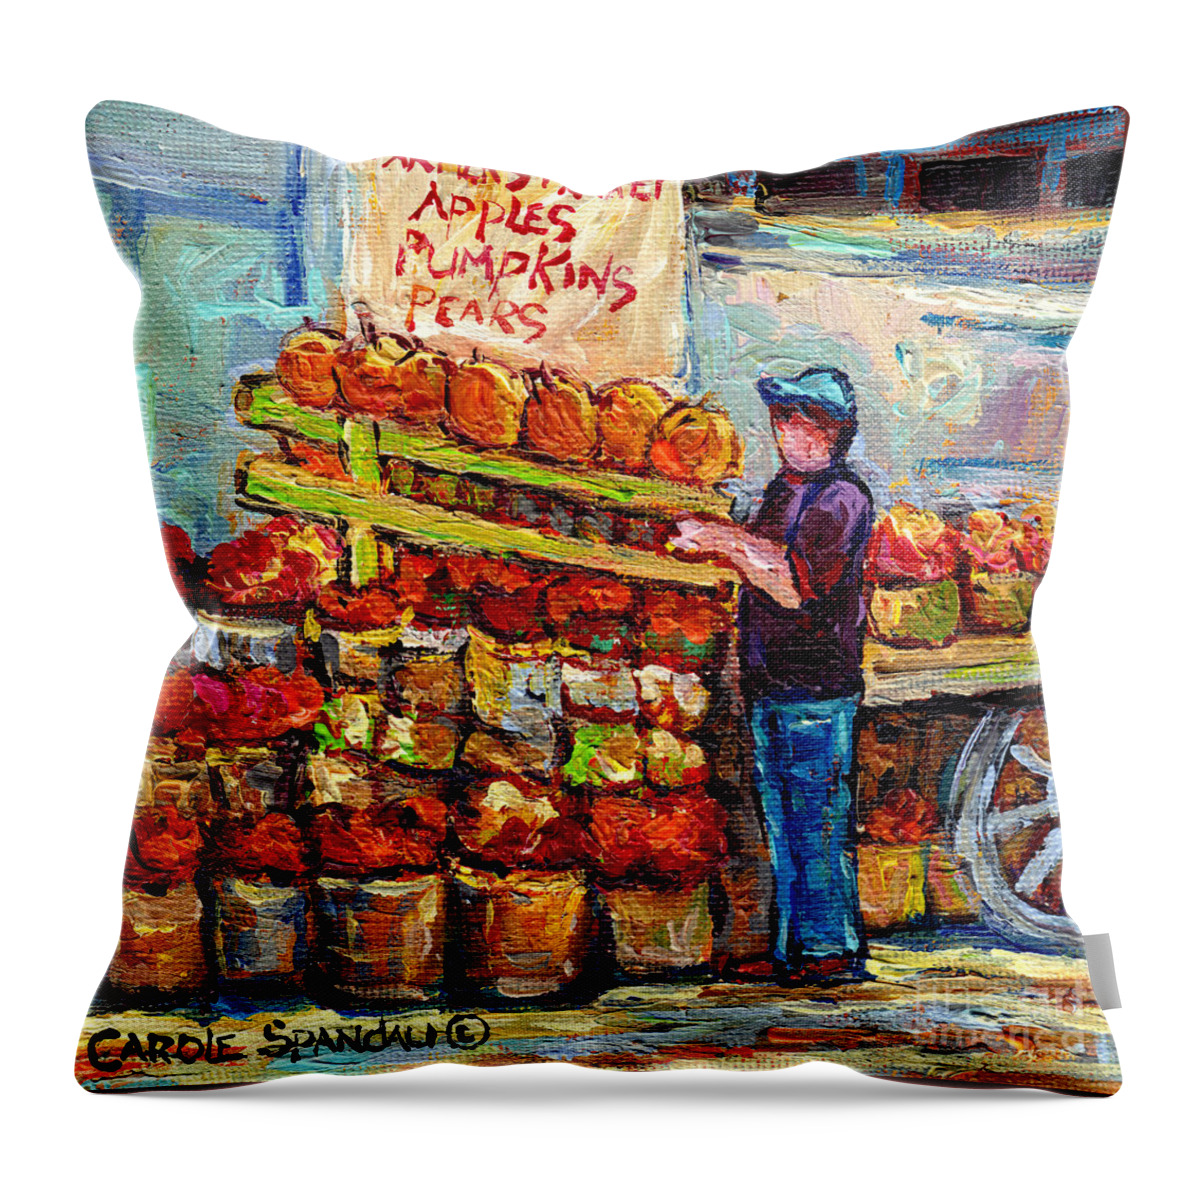 Markets Throw Pillow featuring the painting Apple Picking Time At Farmer's Fruit Stand Market Scene Canadian Paintings C Spandau Artist     by Carole Spandau